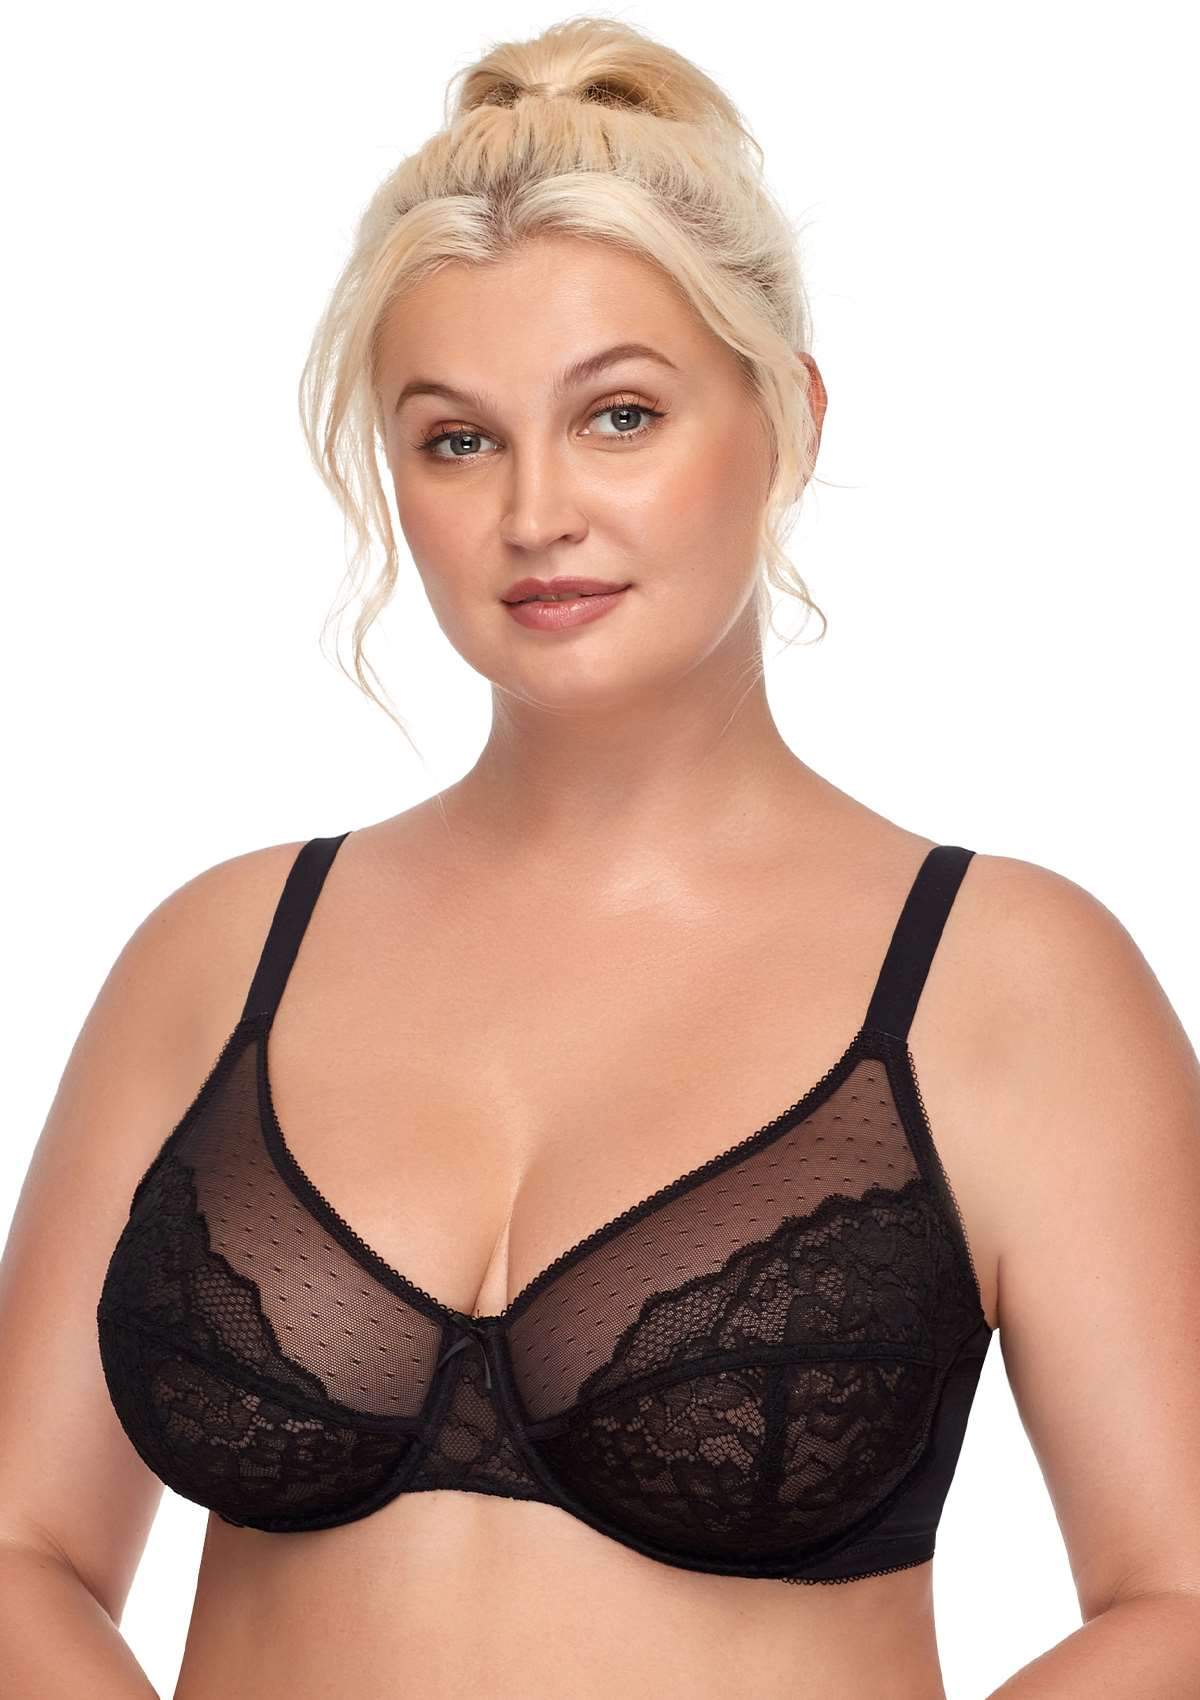 HSIA Enchante Lace Wire Bra For Lifting And Separating Large Breasts - Black / 42 / C